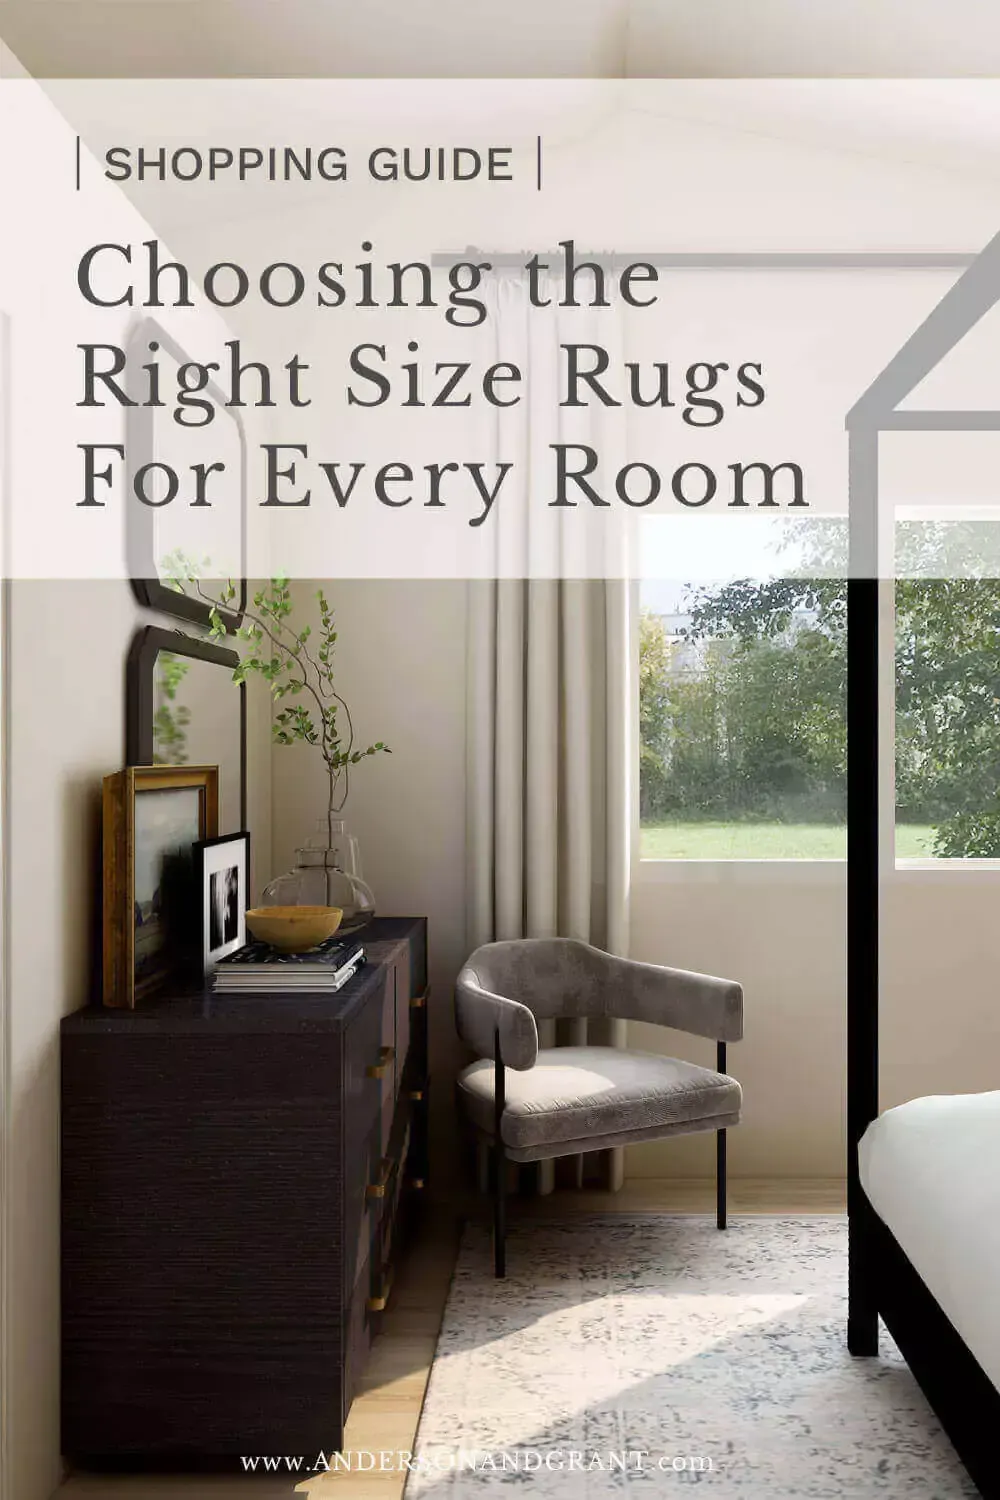 Choosing the Right Size Rugs for Every Room